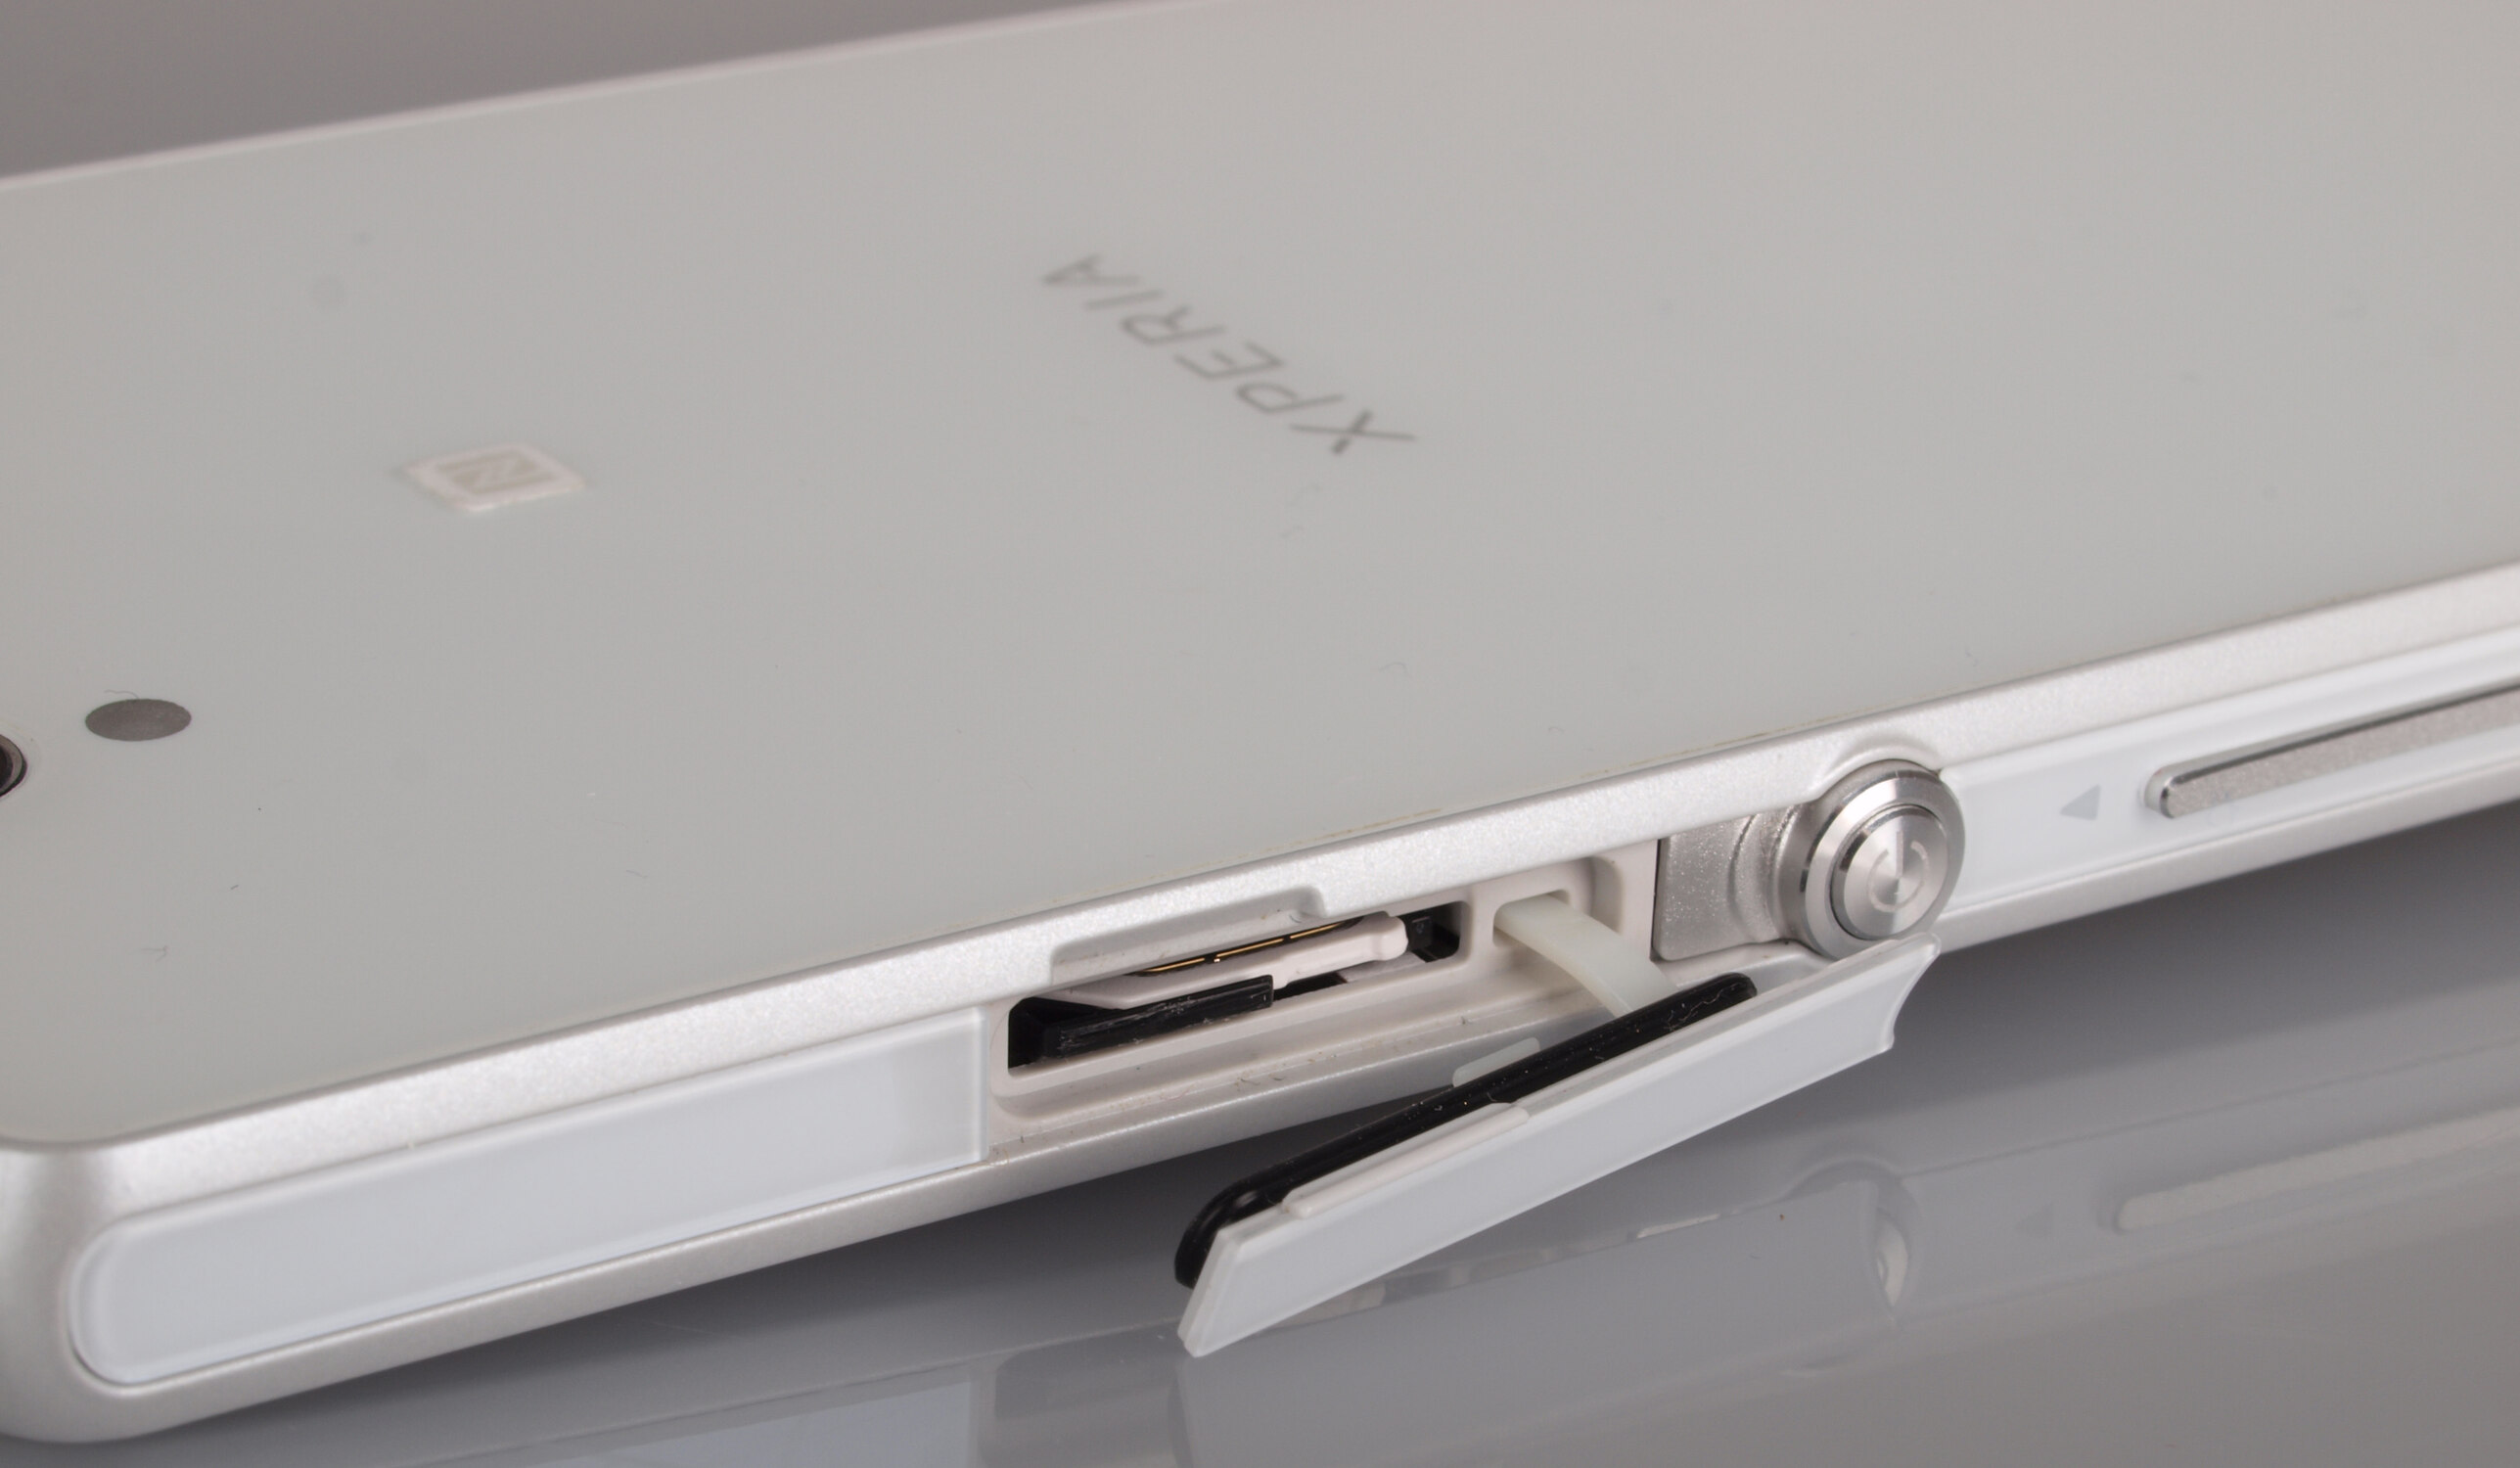 Sony Xperia Z Carrier Compatibility: Finding The Right Network